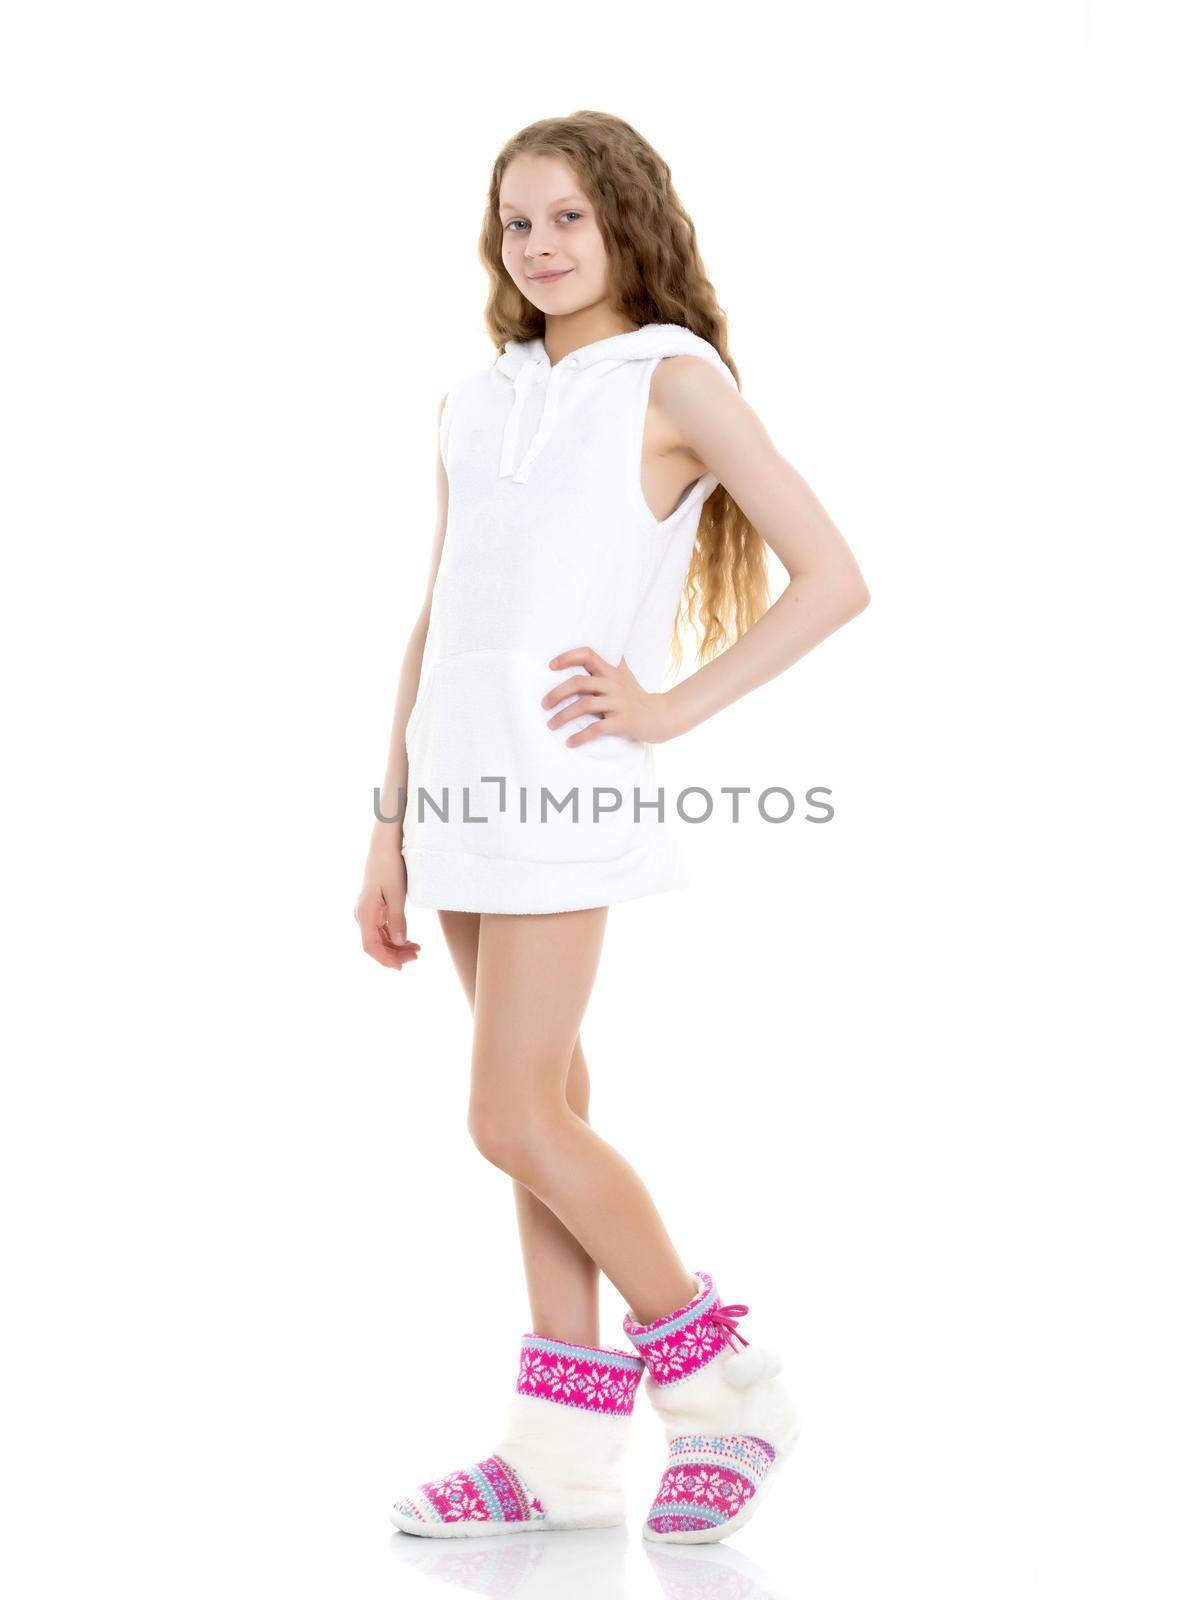 Emotional little girl in a clean white T-shirt. The concept can be used to advertise goods and services, whose logo can be printed on the surface of the shirt. Isolated on white background